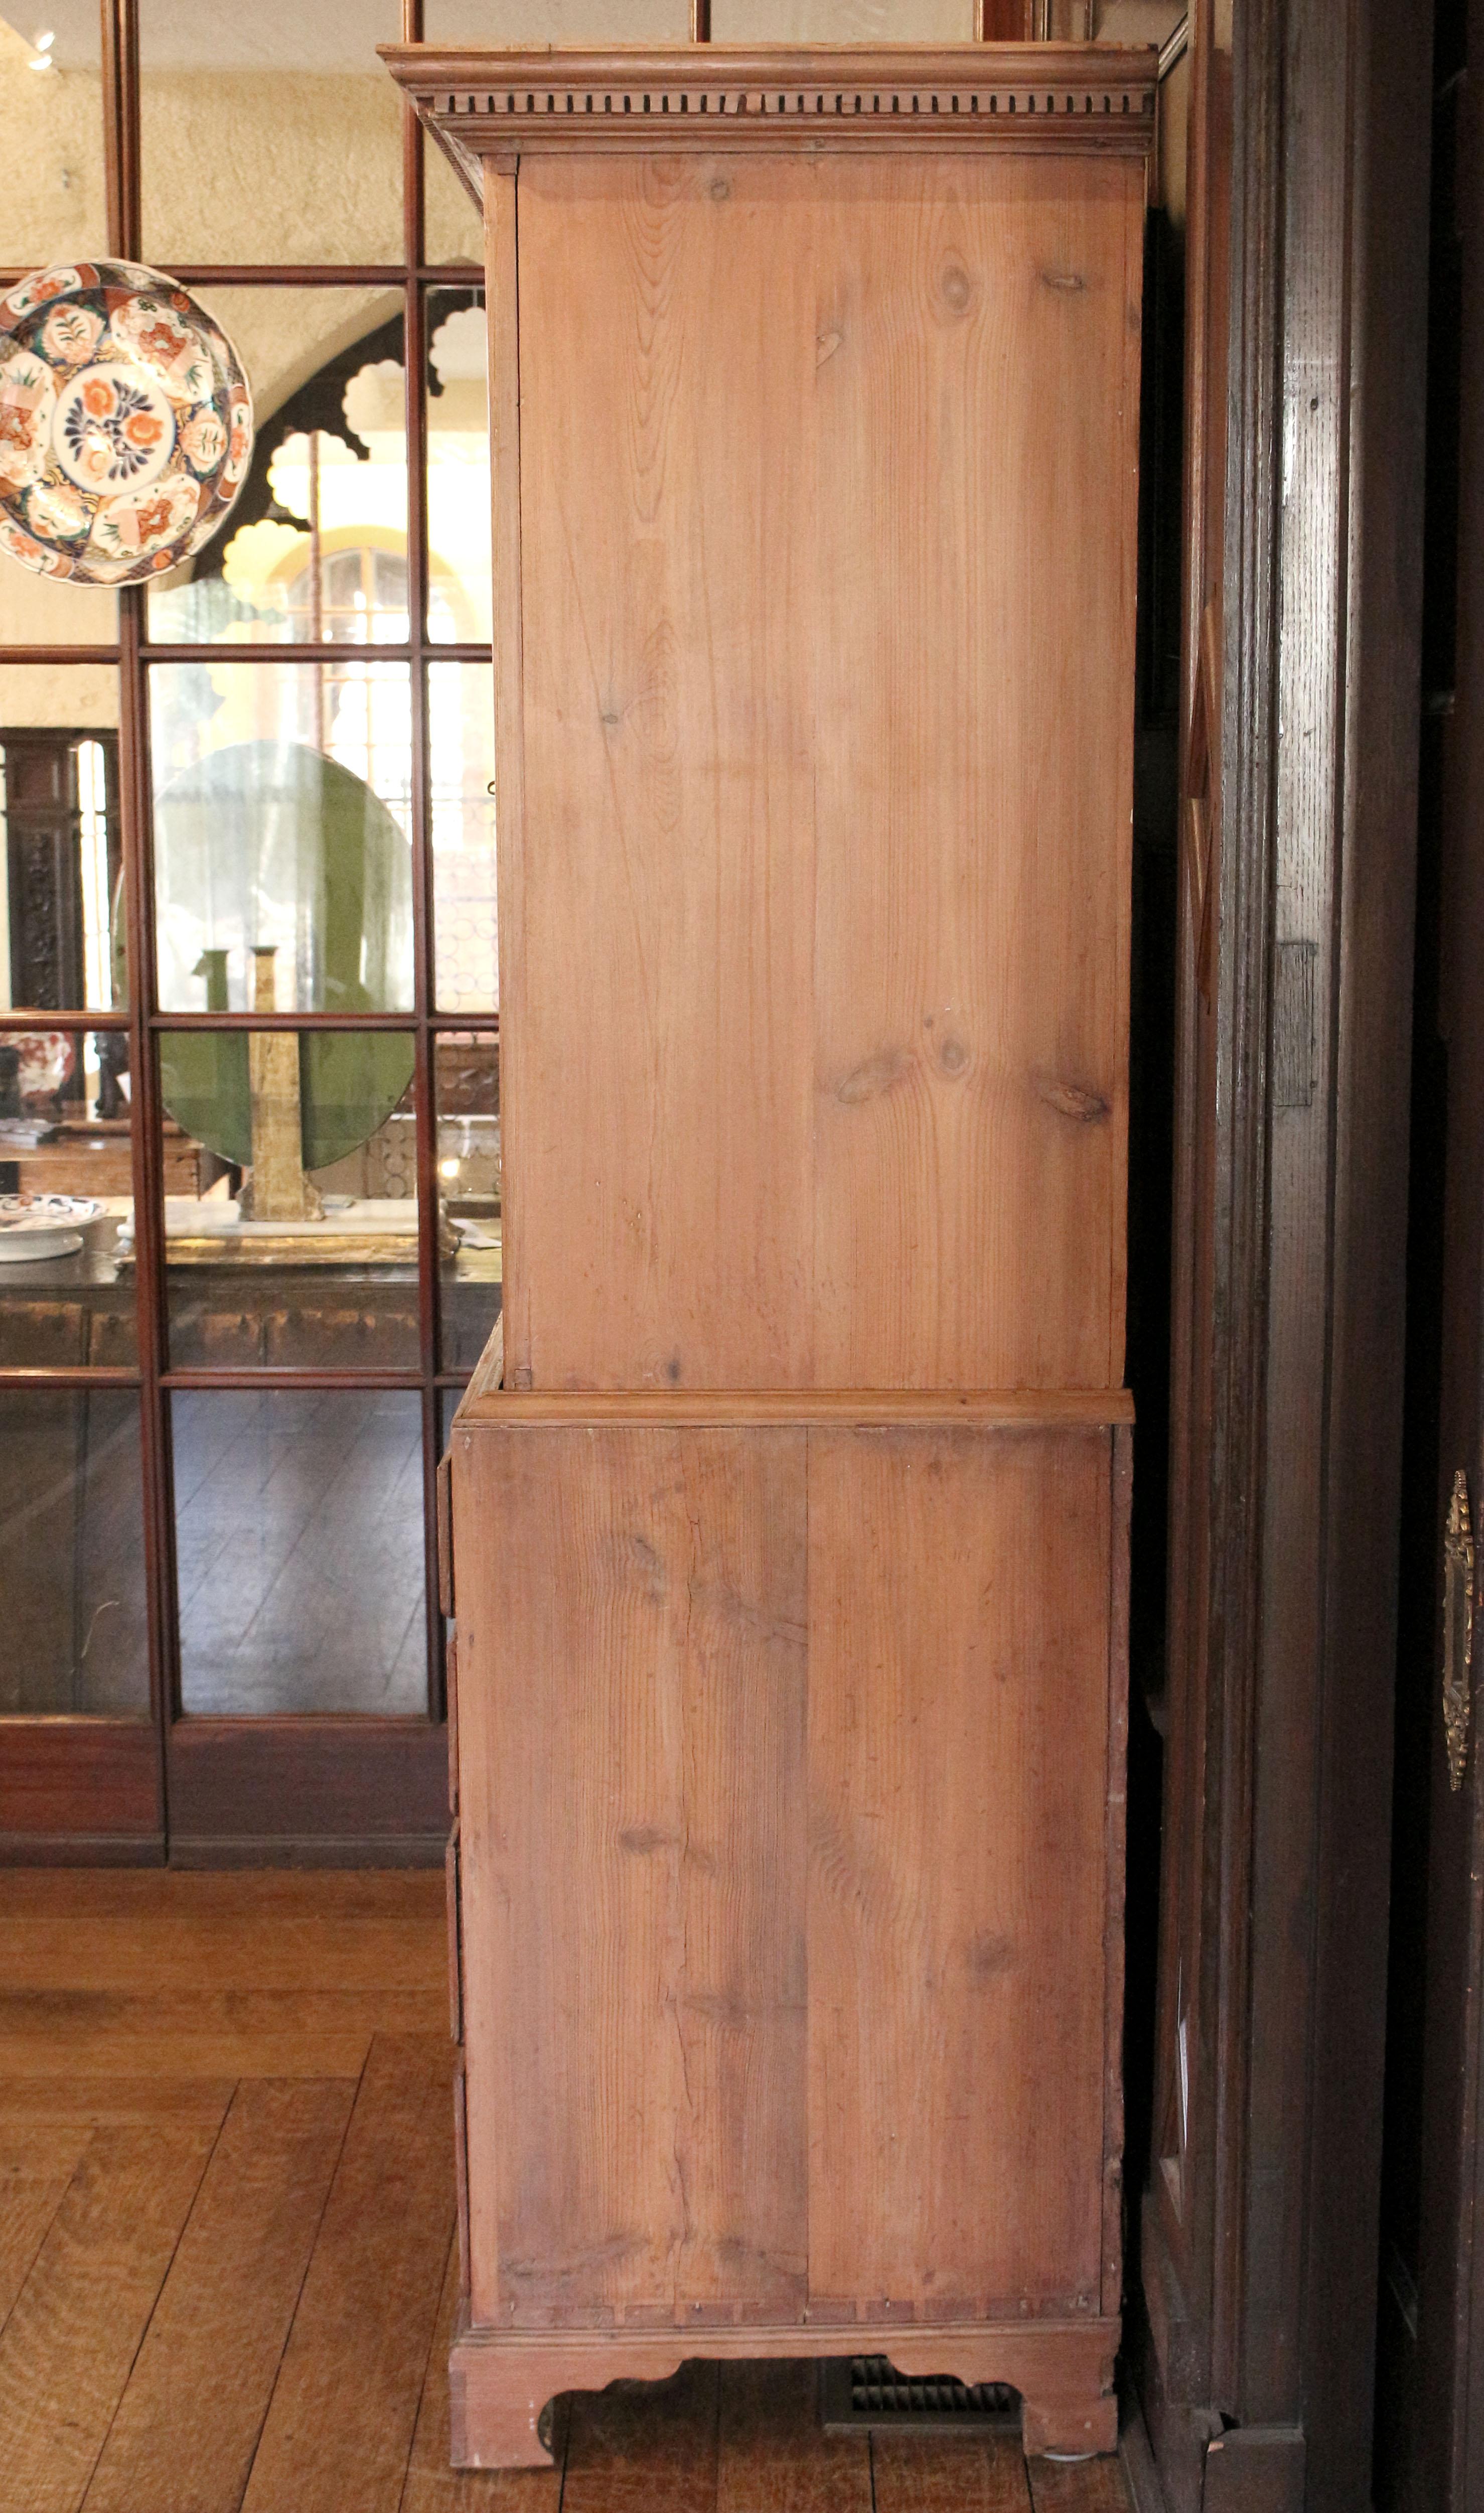 Circa 1765-80 George III Period English Linen Press In Good Condition For Sale In Chapel Hill, NC